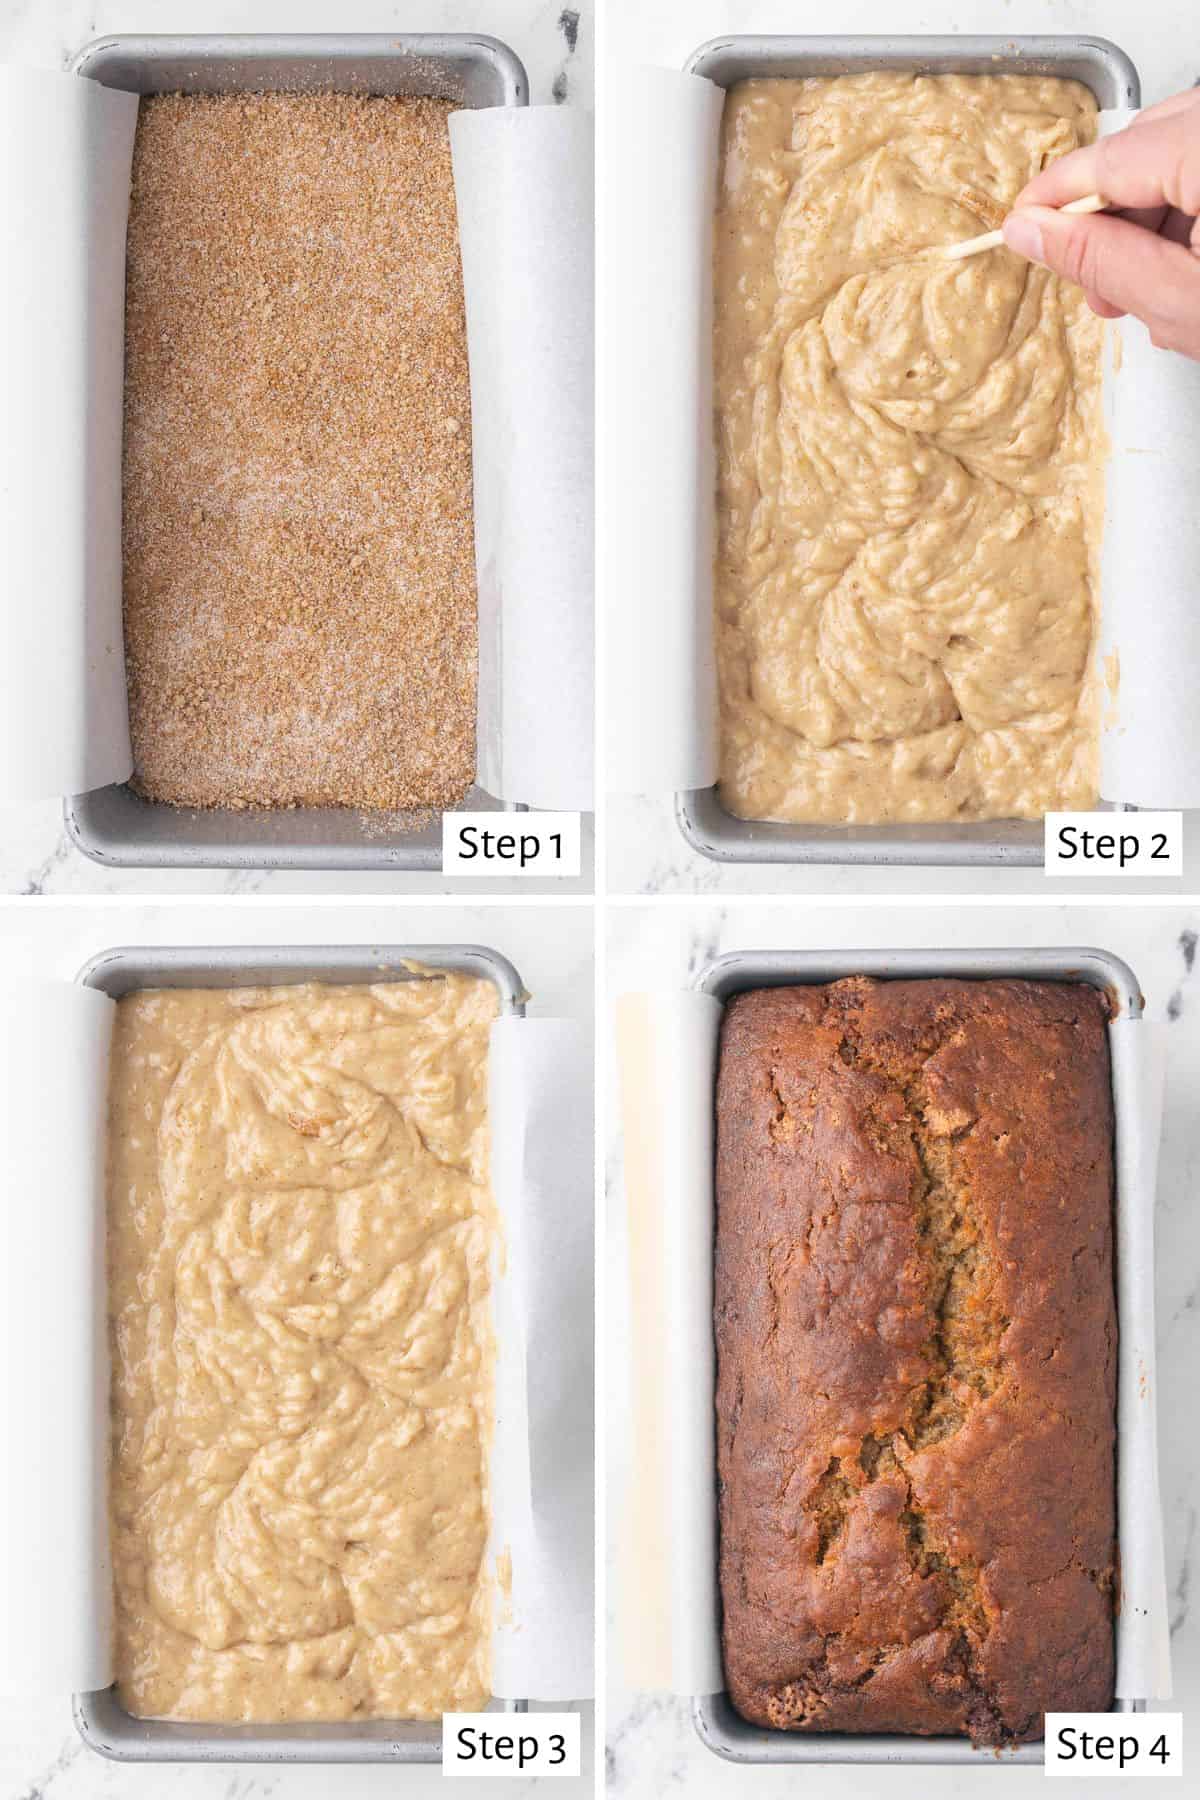 4-image collage of swirling the banana bread: 1 - Adding cinnamon sugar mixture to half the batter in a bread tin; 2 - Swirling the cinnamon sugar into the batter; 3 - Banana bread before baking; 4 - After baking.